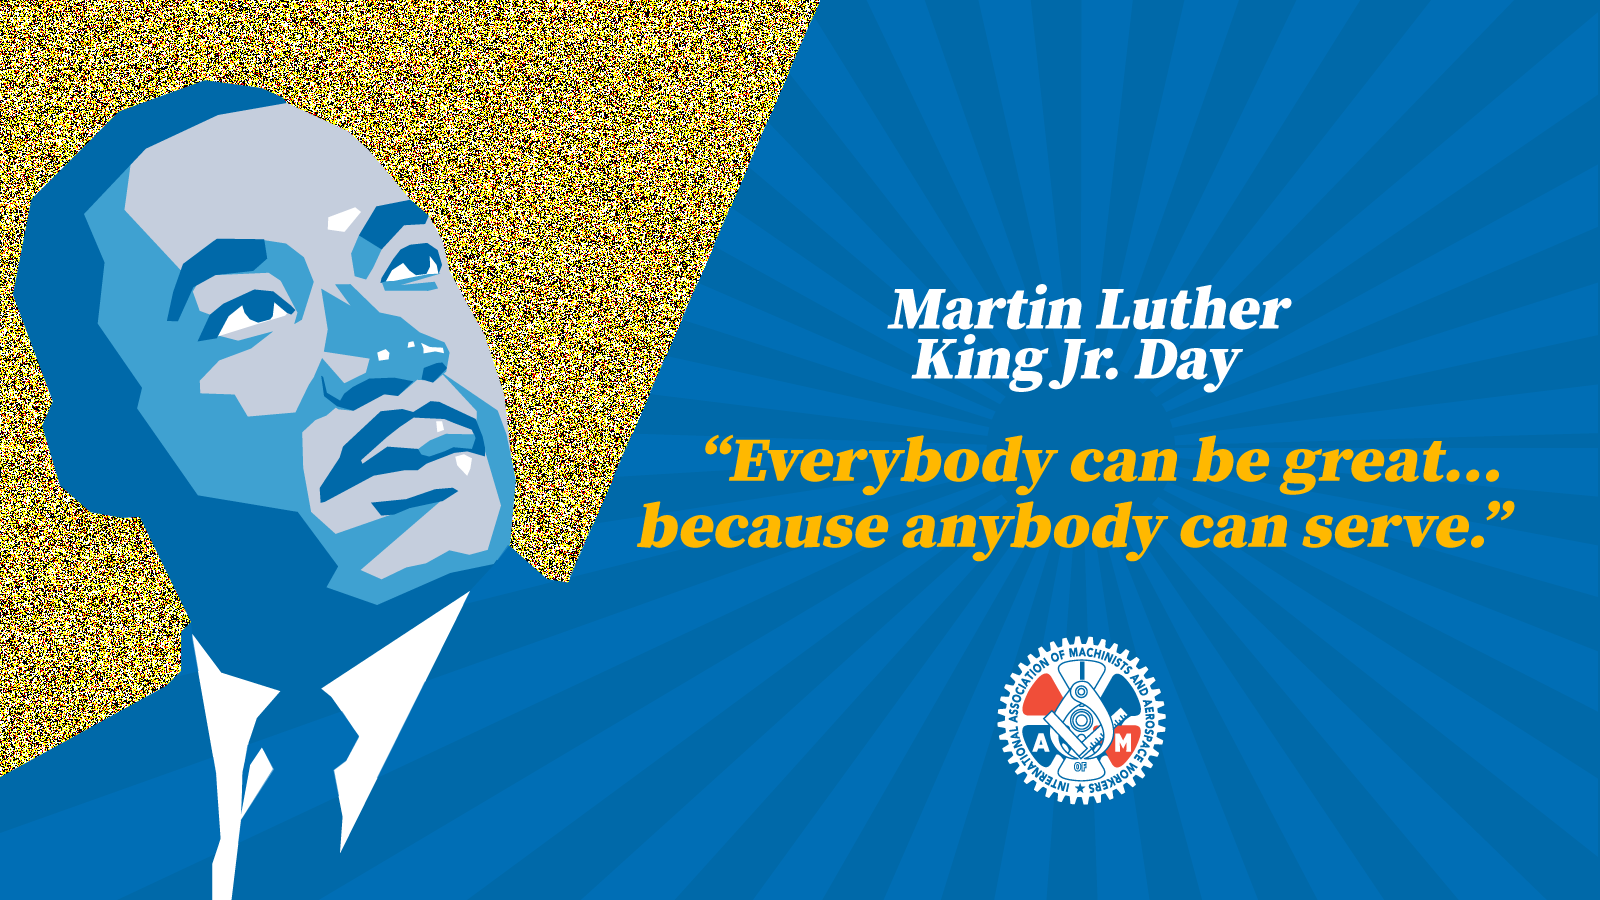 The IAM Honors the Life and Legacy of Dr. Martin Luther King Jr.